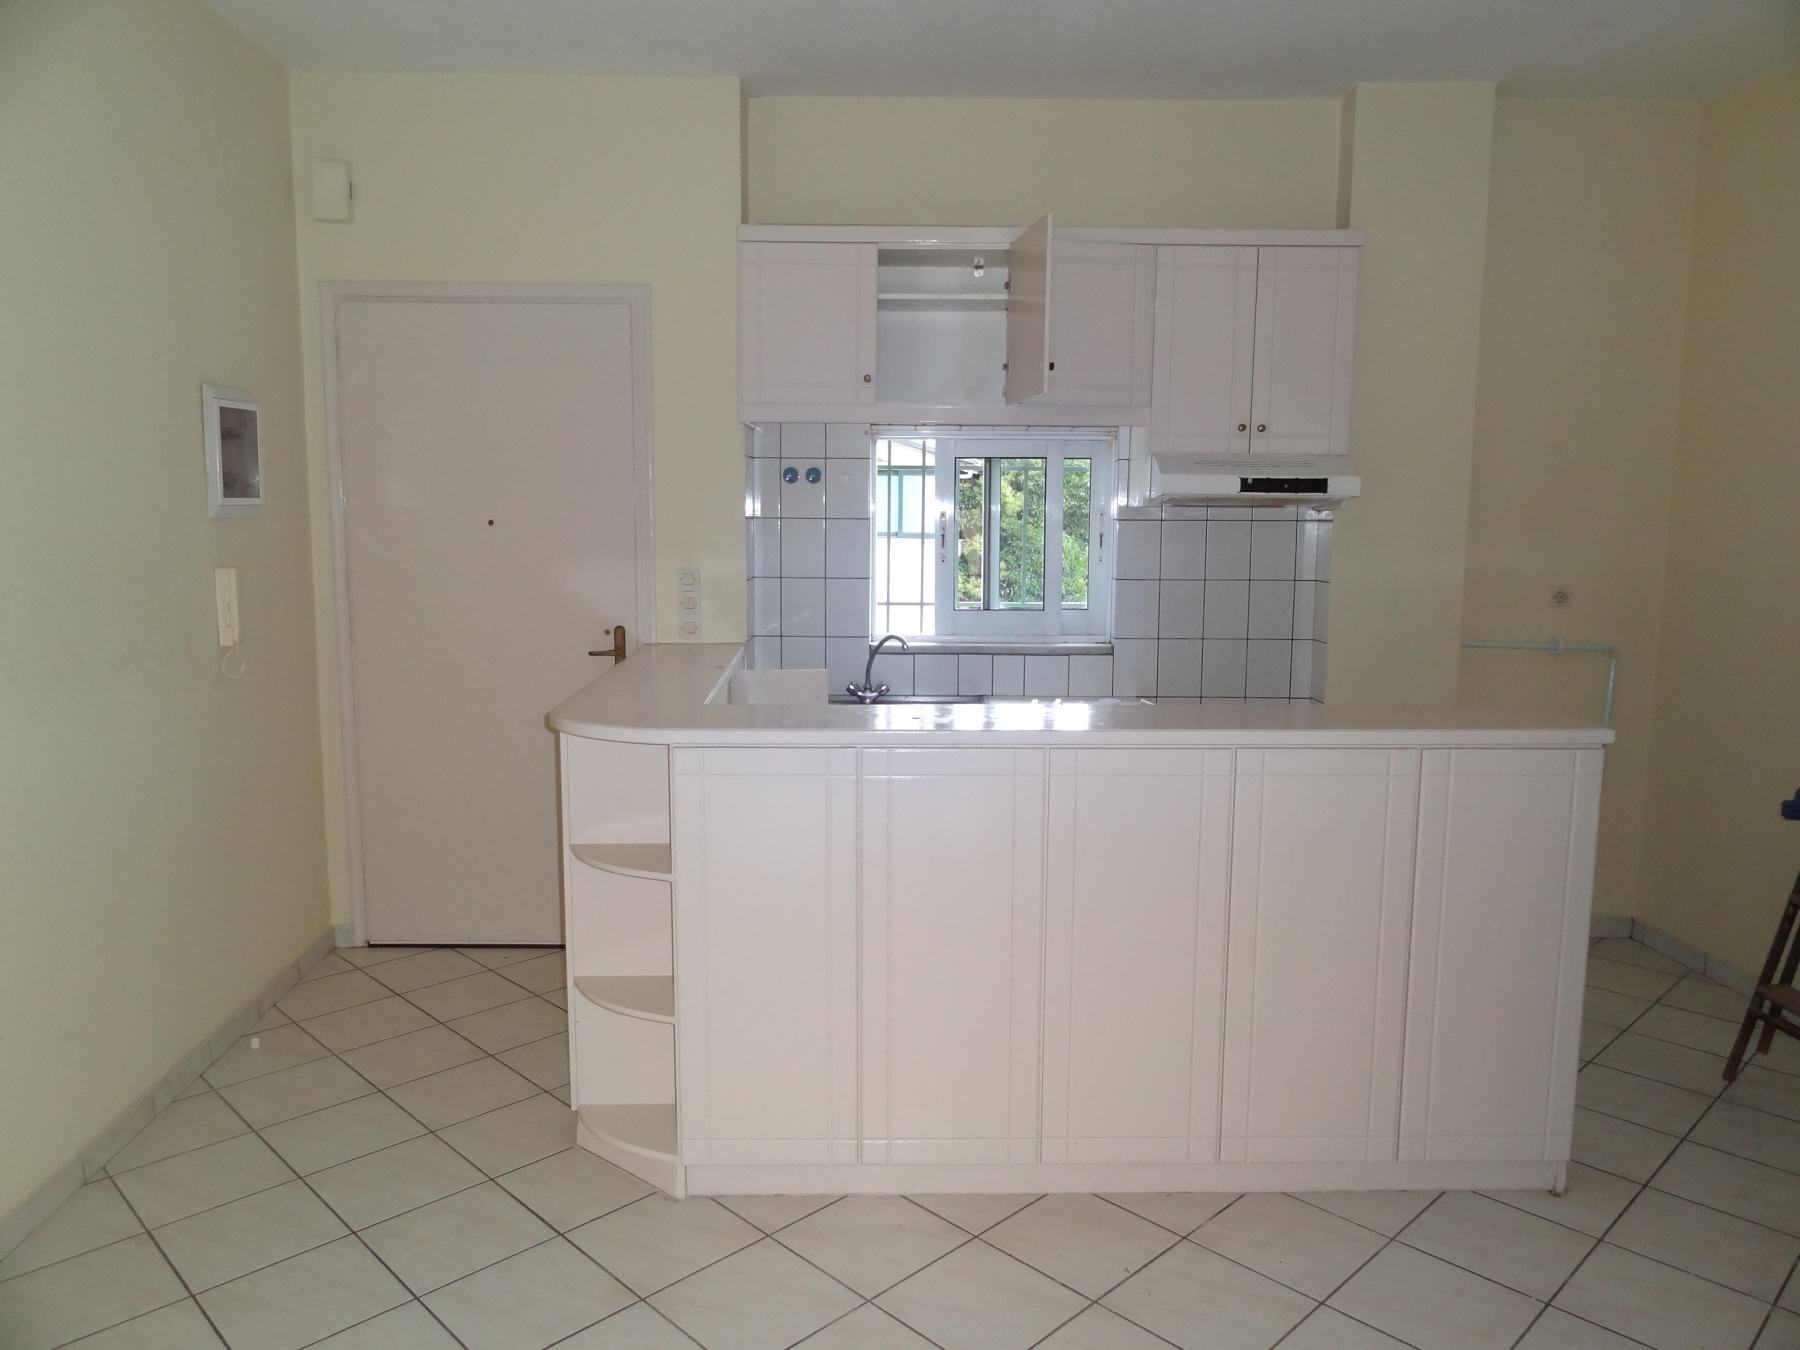 For rent in the center of Ioannina, 1 bedroom apartment 48 sq.m. on the 1st floor of an apartment building